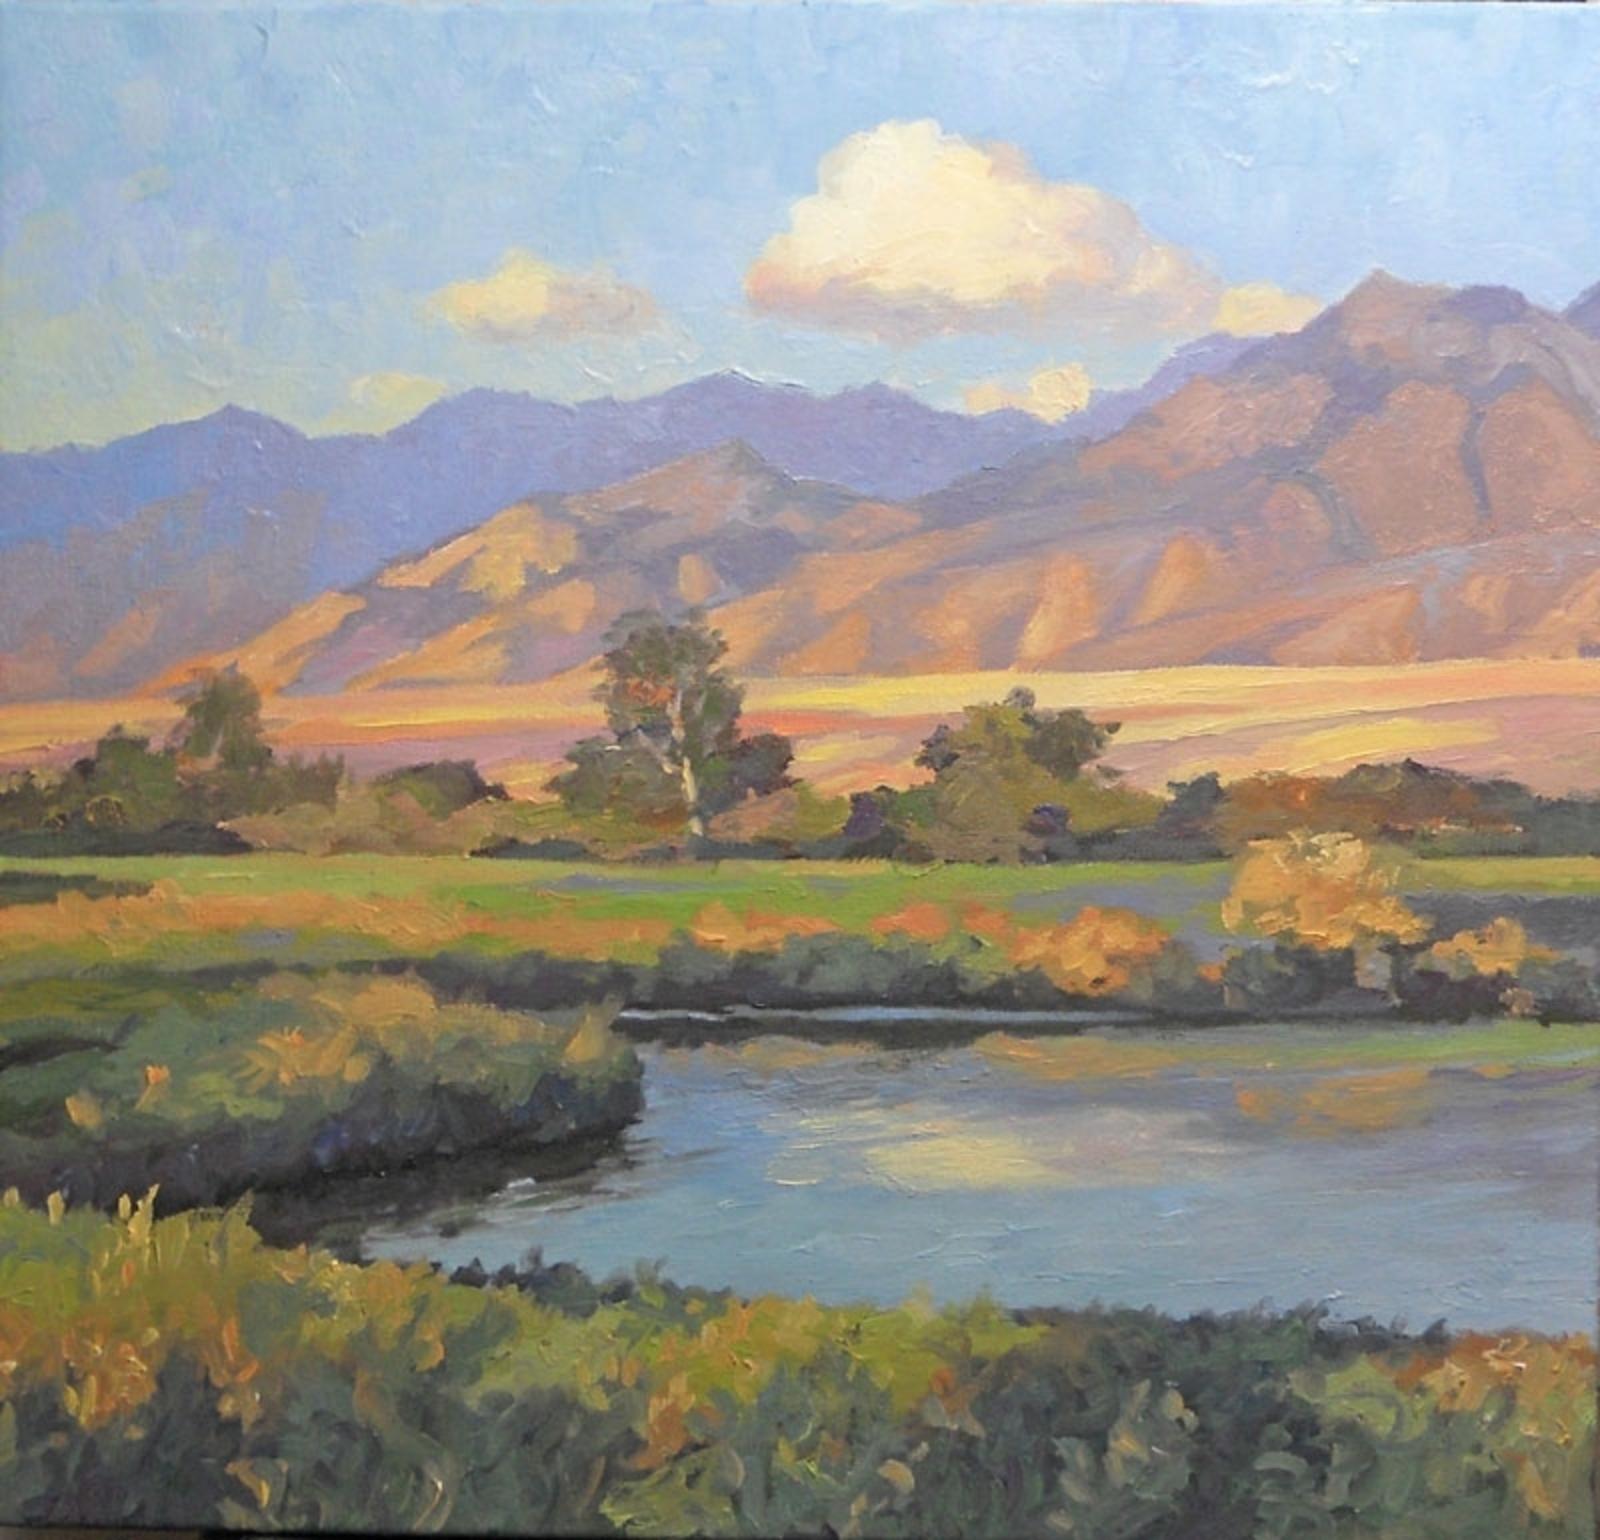 "Bridger Mountains—Summer" by painter Bruce Park (https://www.bruceparkarts.com).  Native people knew the area stretching west of present-day Bozeman as the "Valley of Flowers".